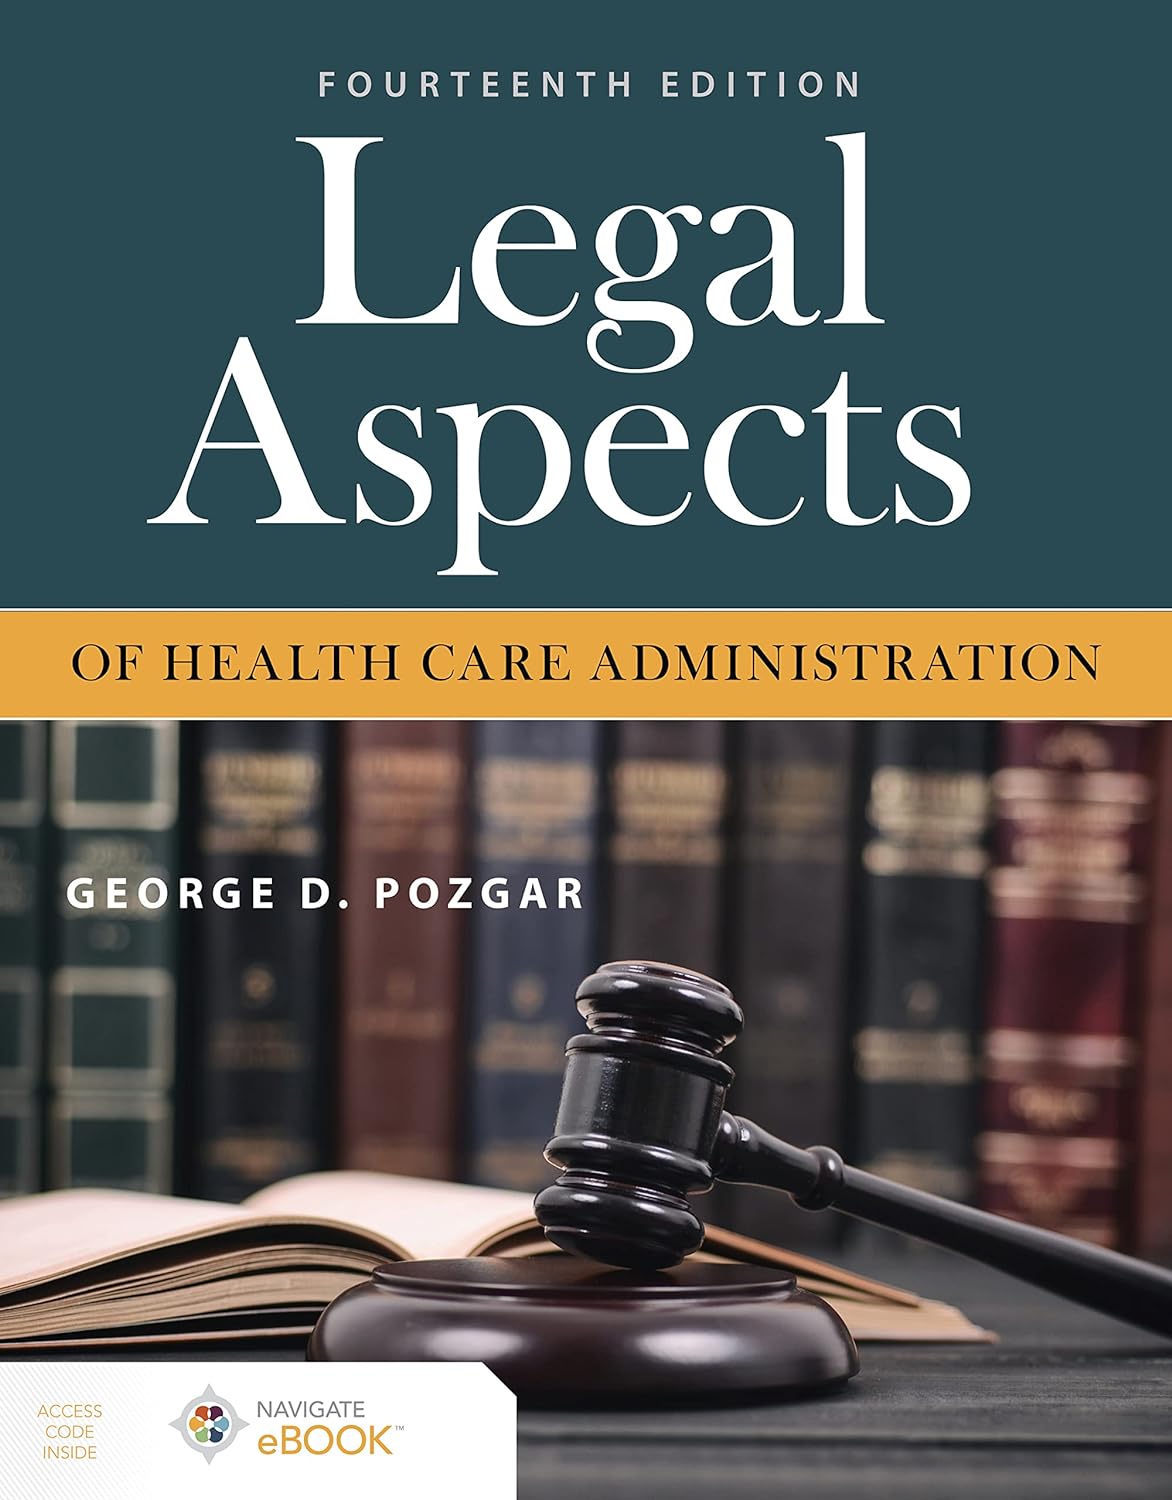 A cover image for the book and test bank of Legal Aspects of Health Care Administration by Pozgar